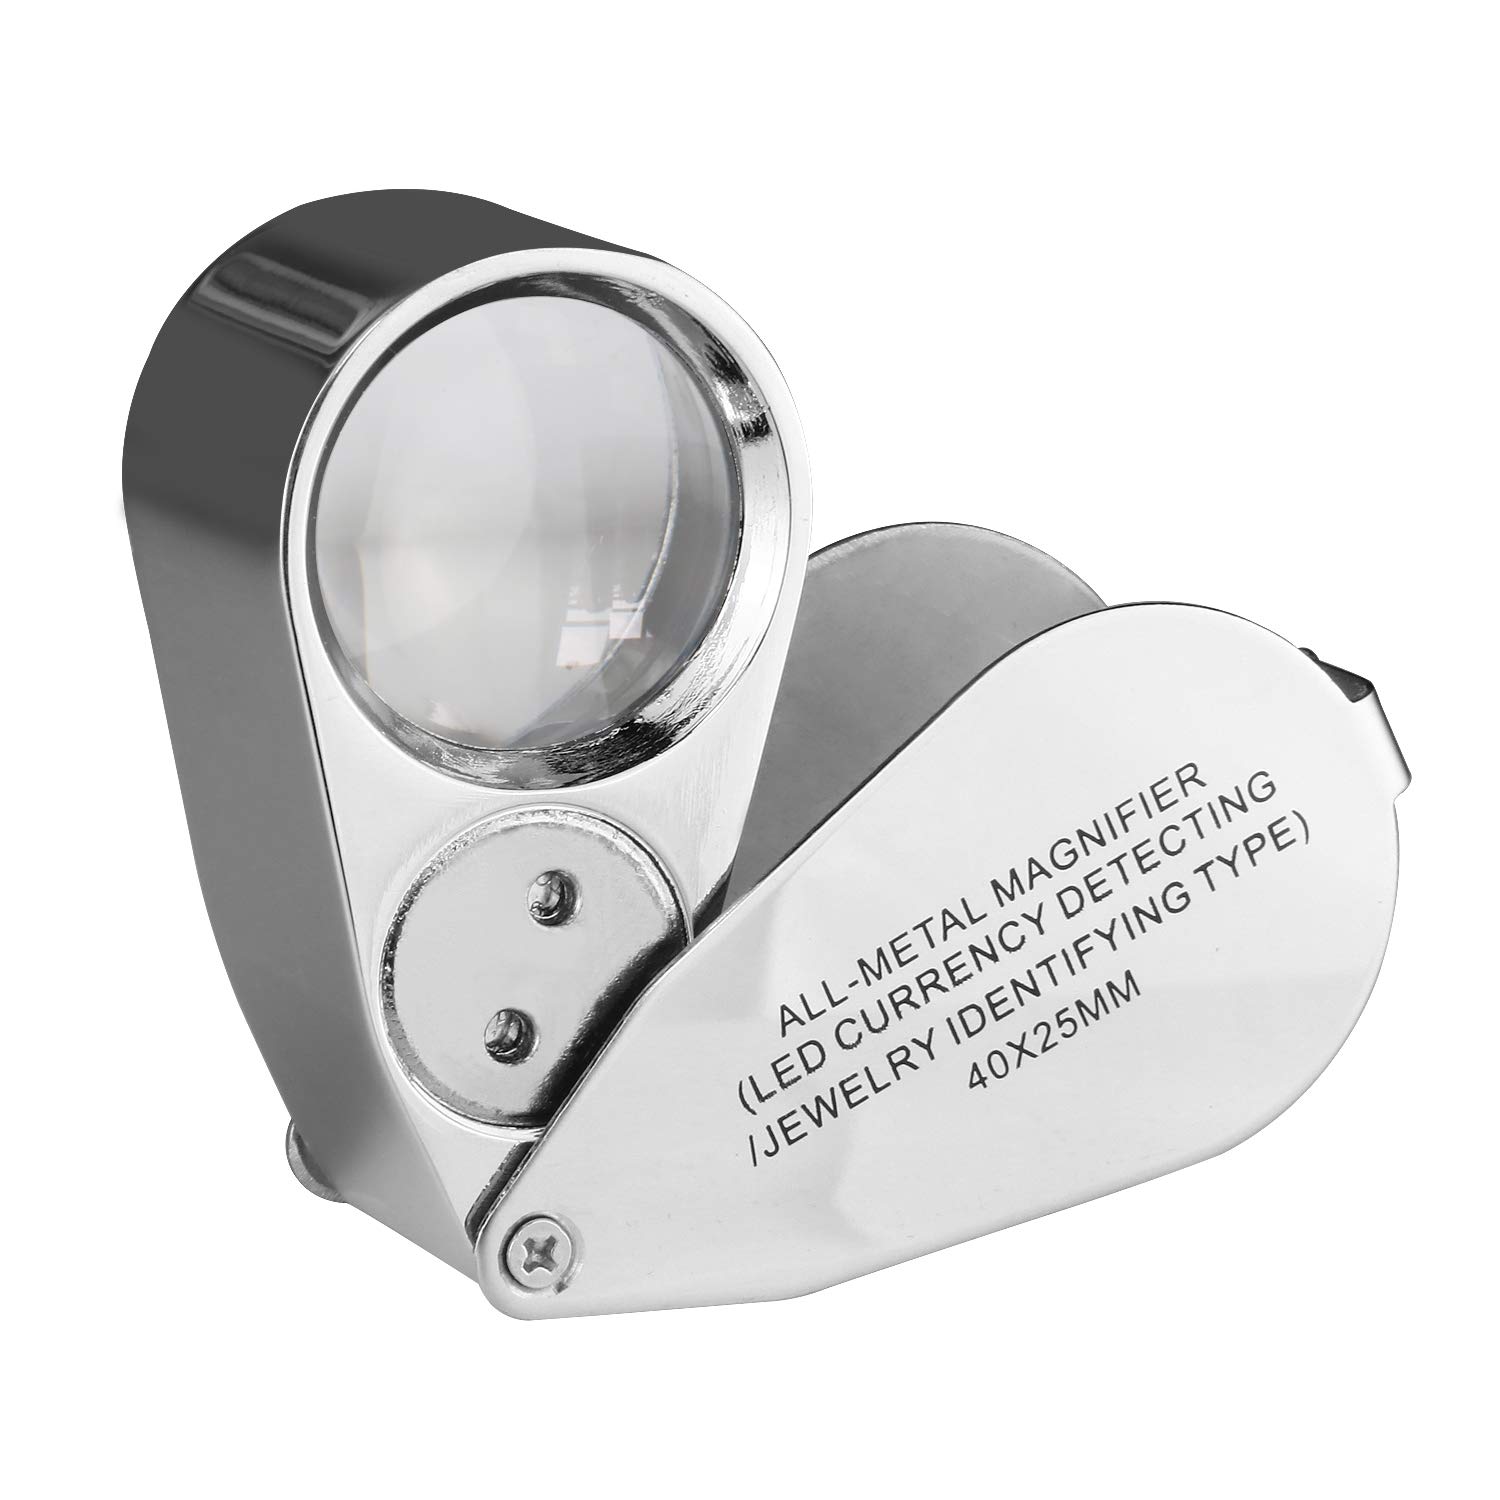 40X LED Illuminated Jeweler Loupe Wide Range Scope Eye Magnifying Glass  Good for Gardening Jewelry Antiques Coins Rocks Stamps Hobbies Watches and